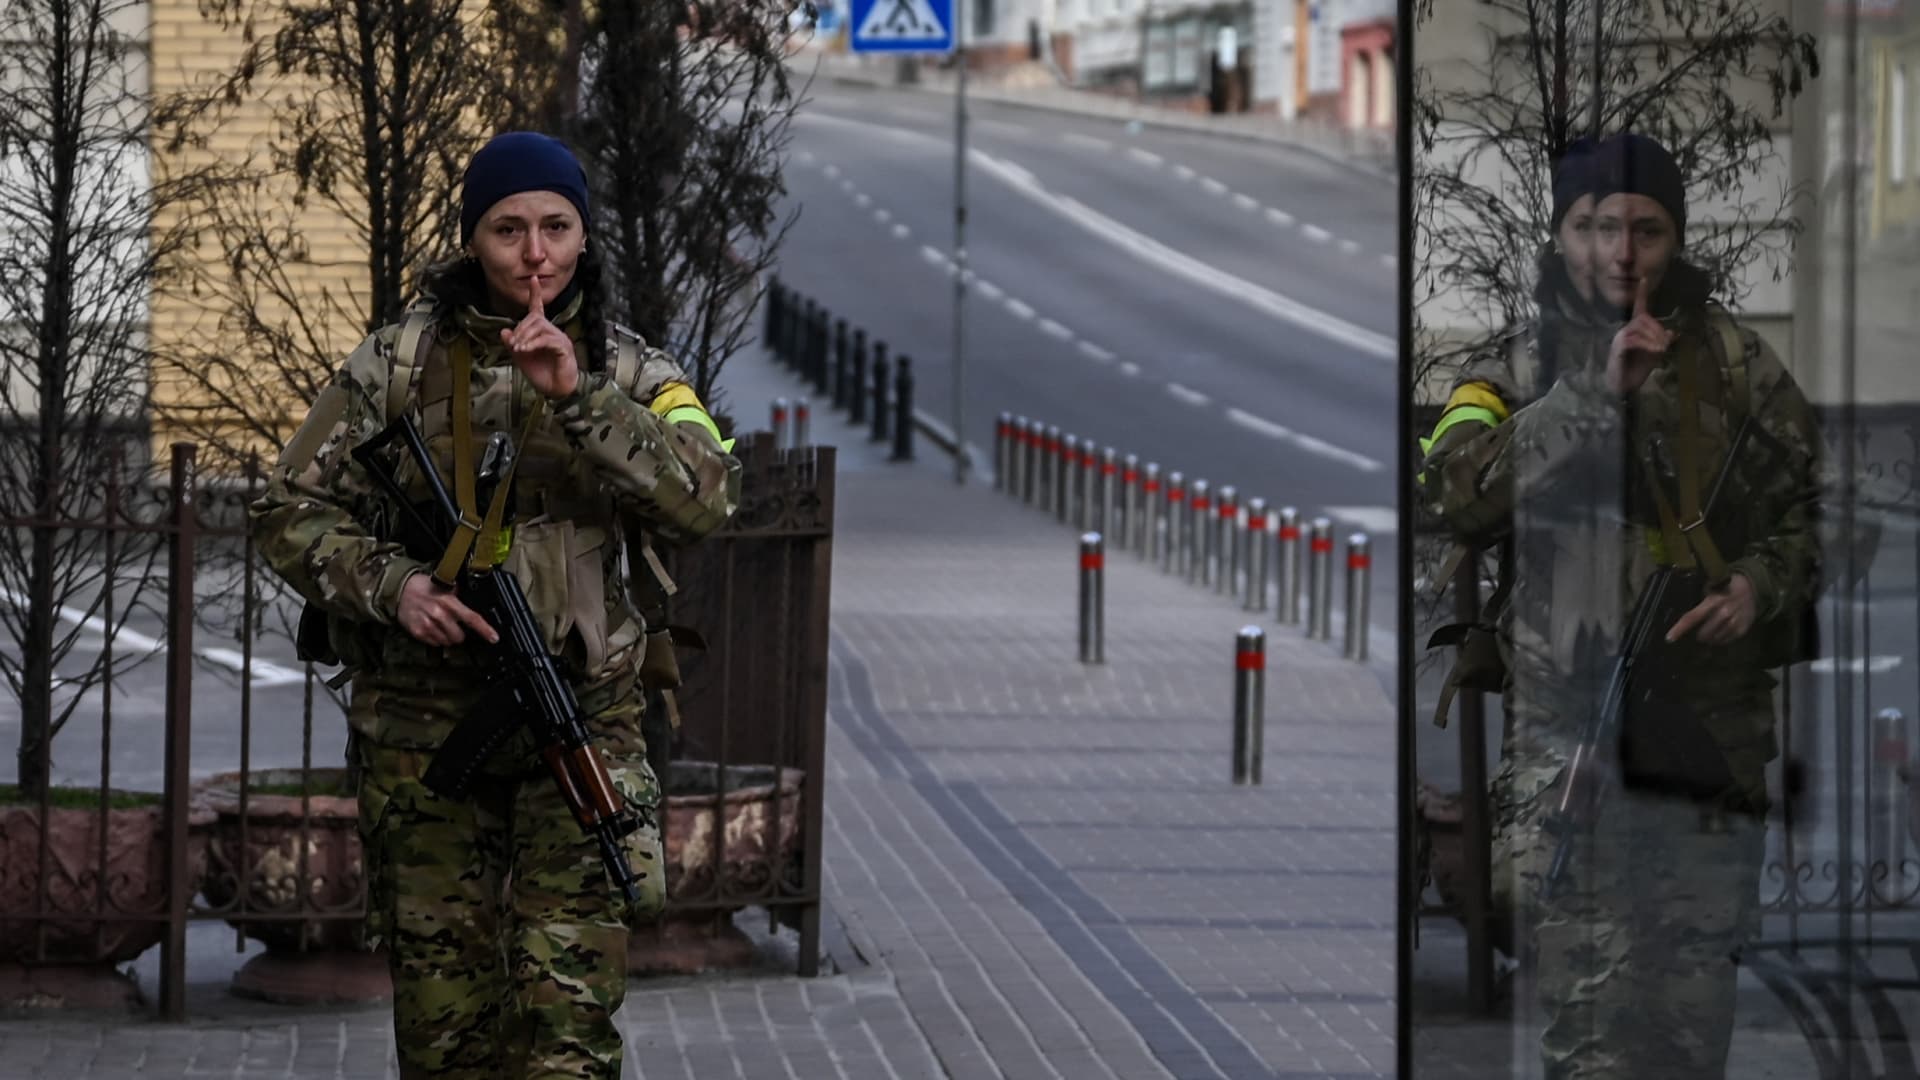 A member of Ukrainian forces patrols the streets at Maidan square in Kyiv, on February 27, 2022.